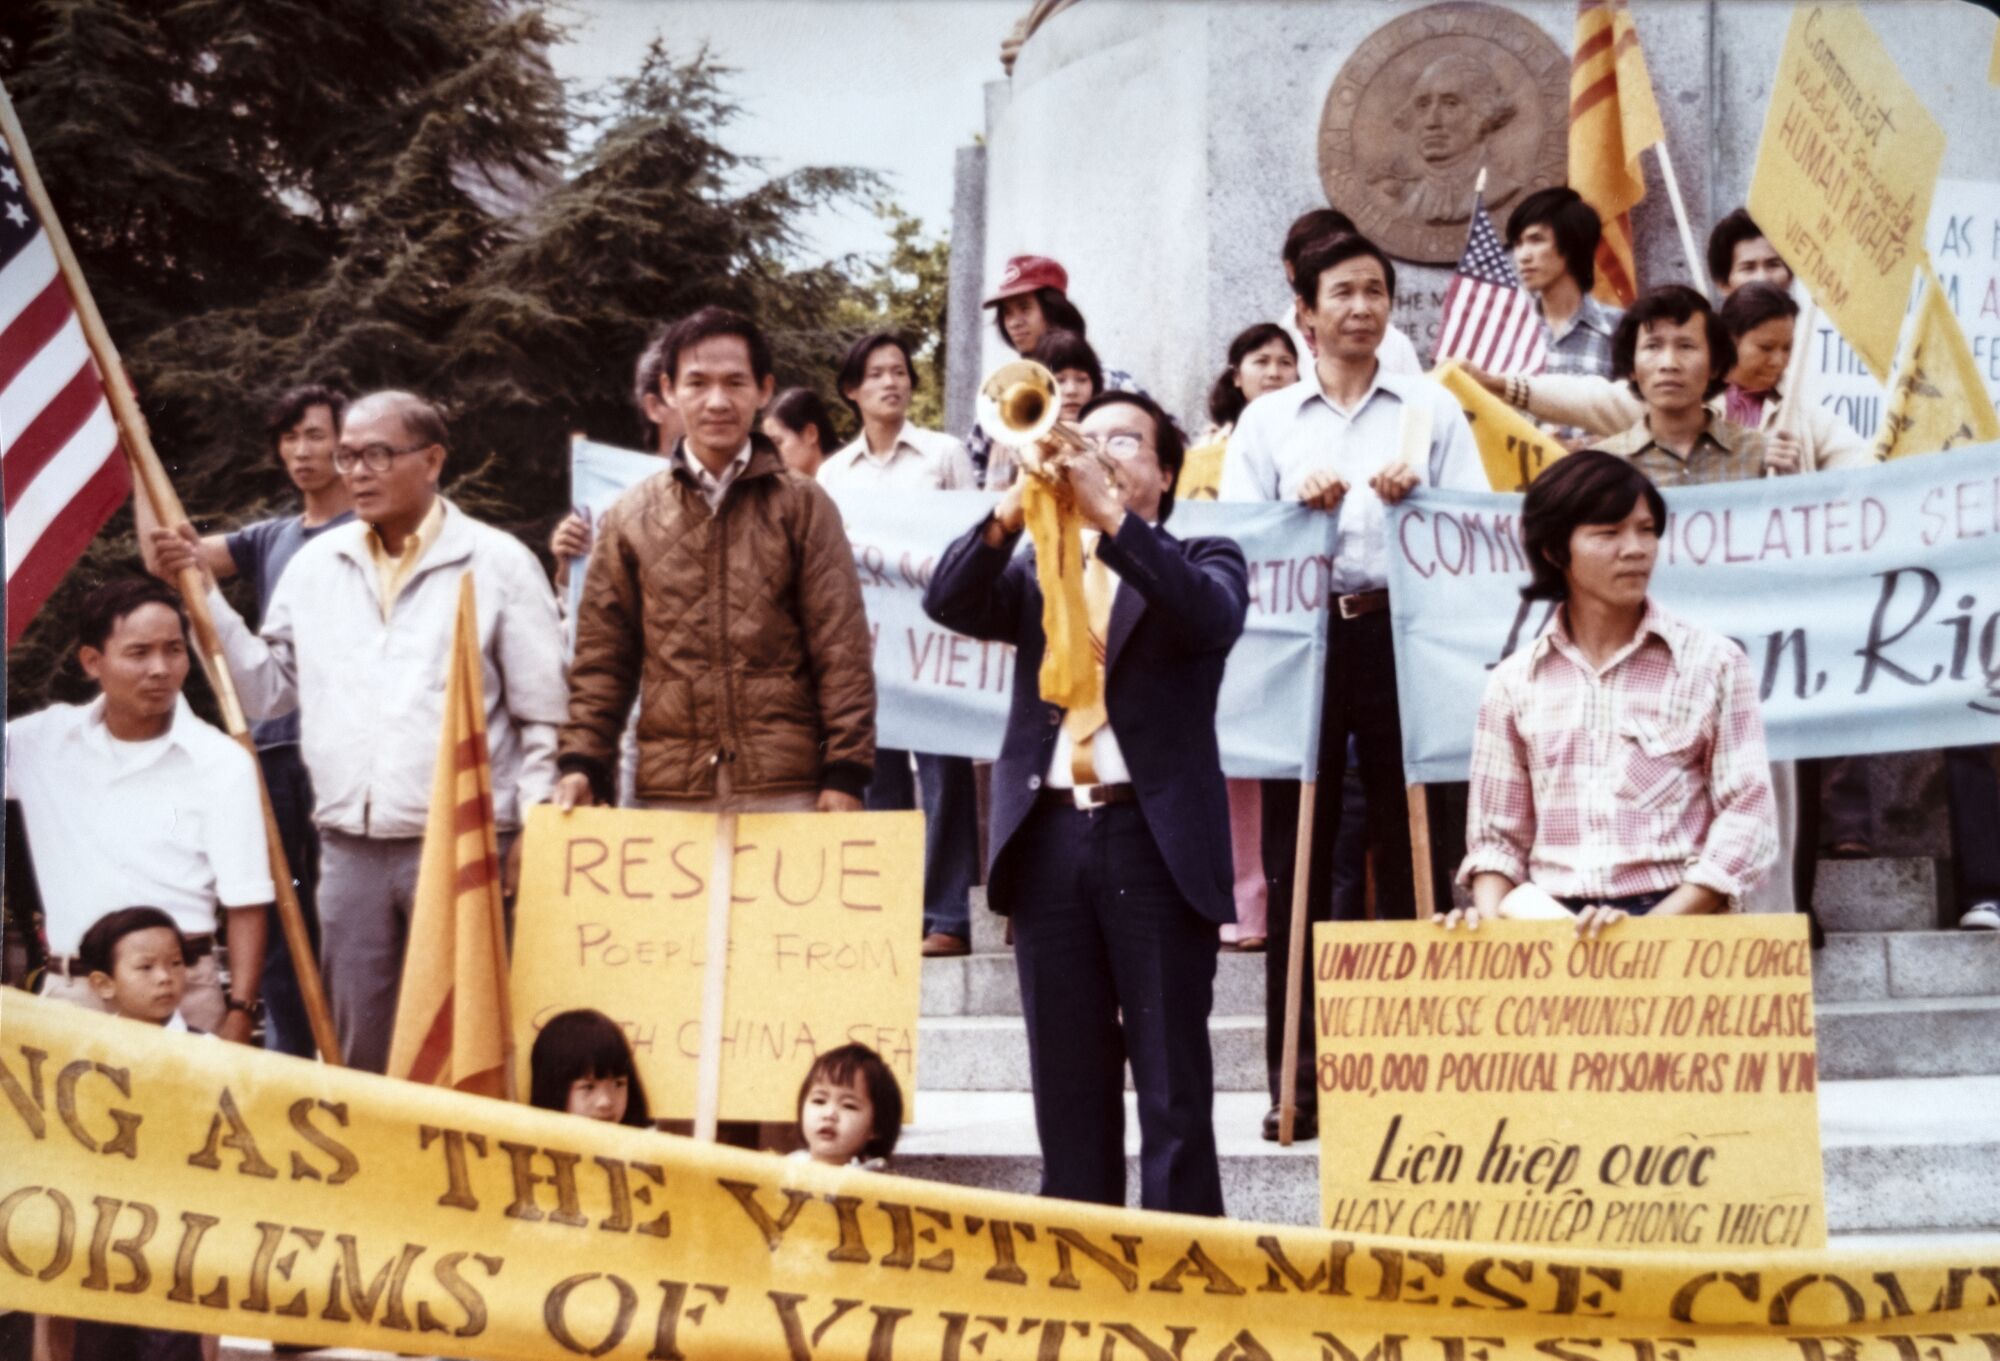 A 1979 photo shows Duc Tan next to a man playing a horn among a crowd at a rally